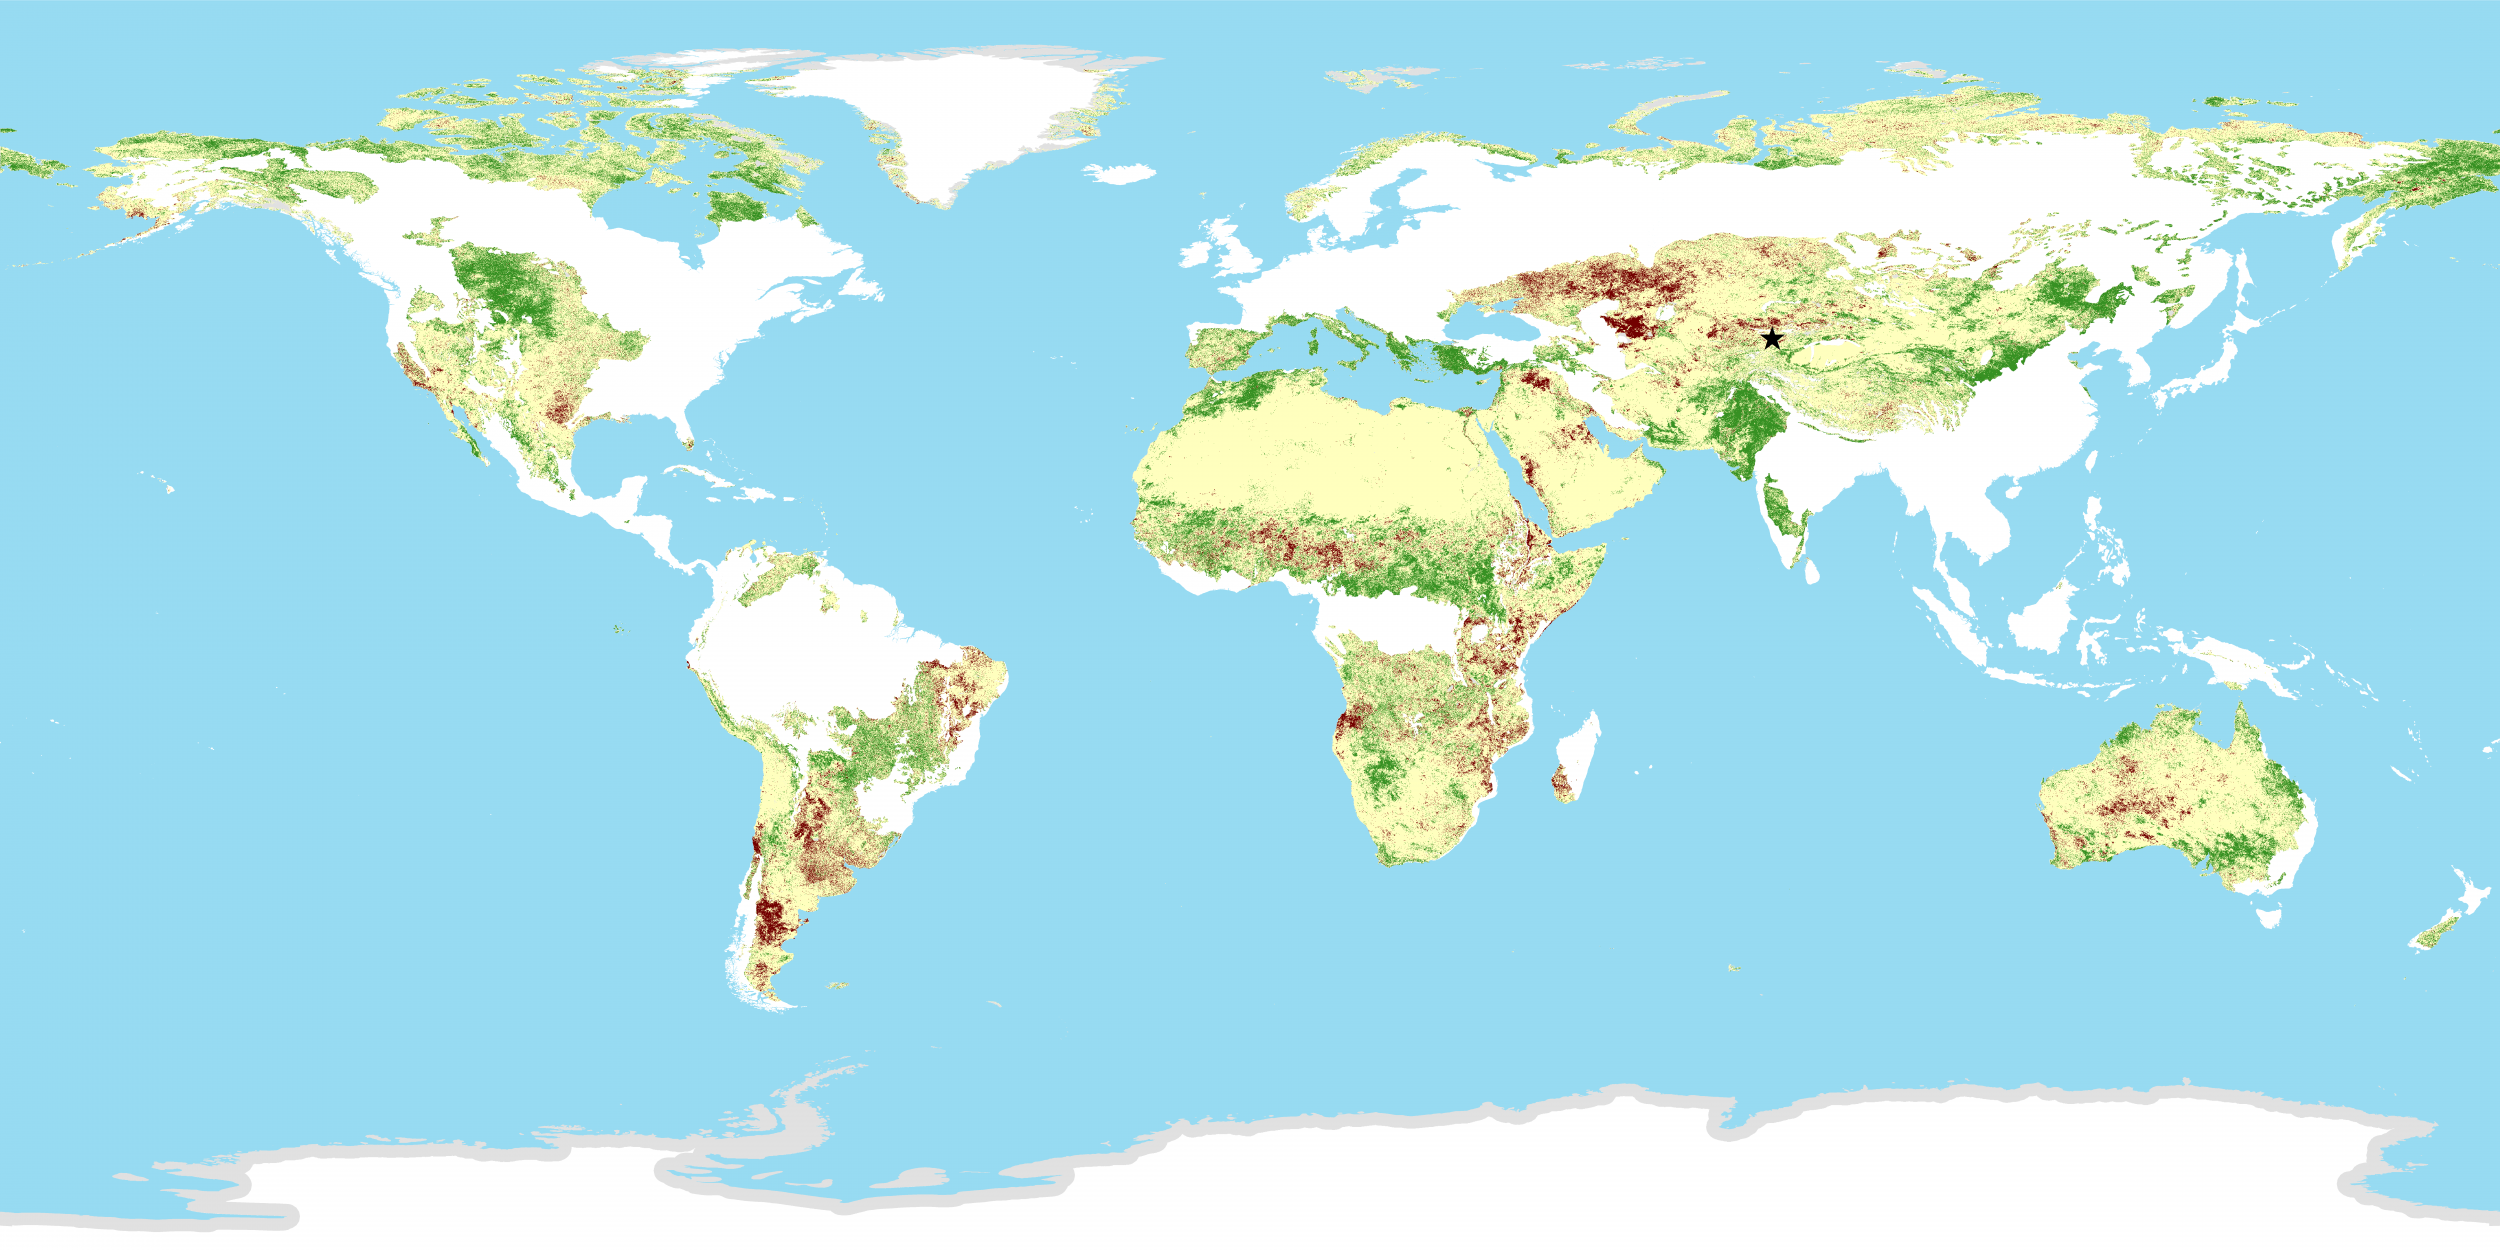 Land productivity trajectory over the period 2001-2015 in rangelands